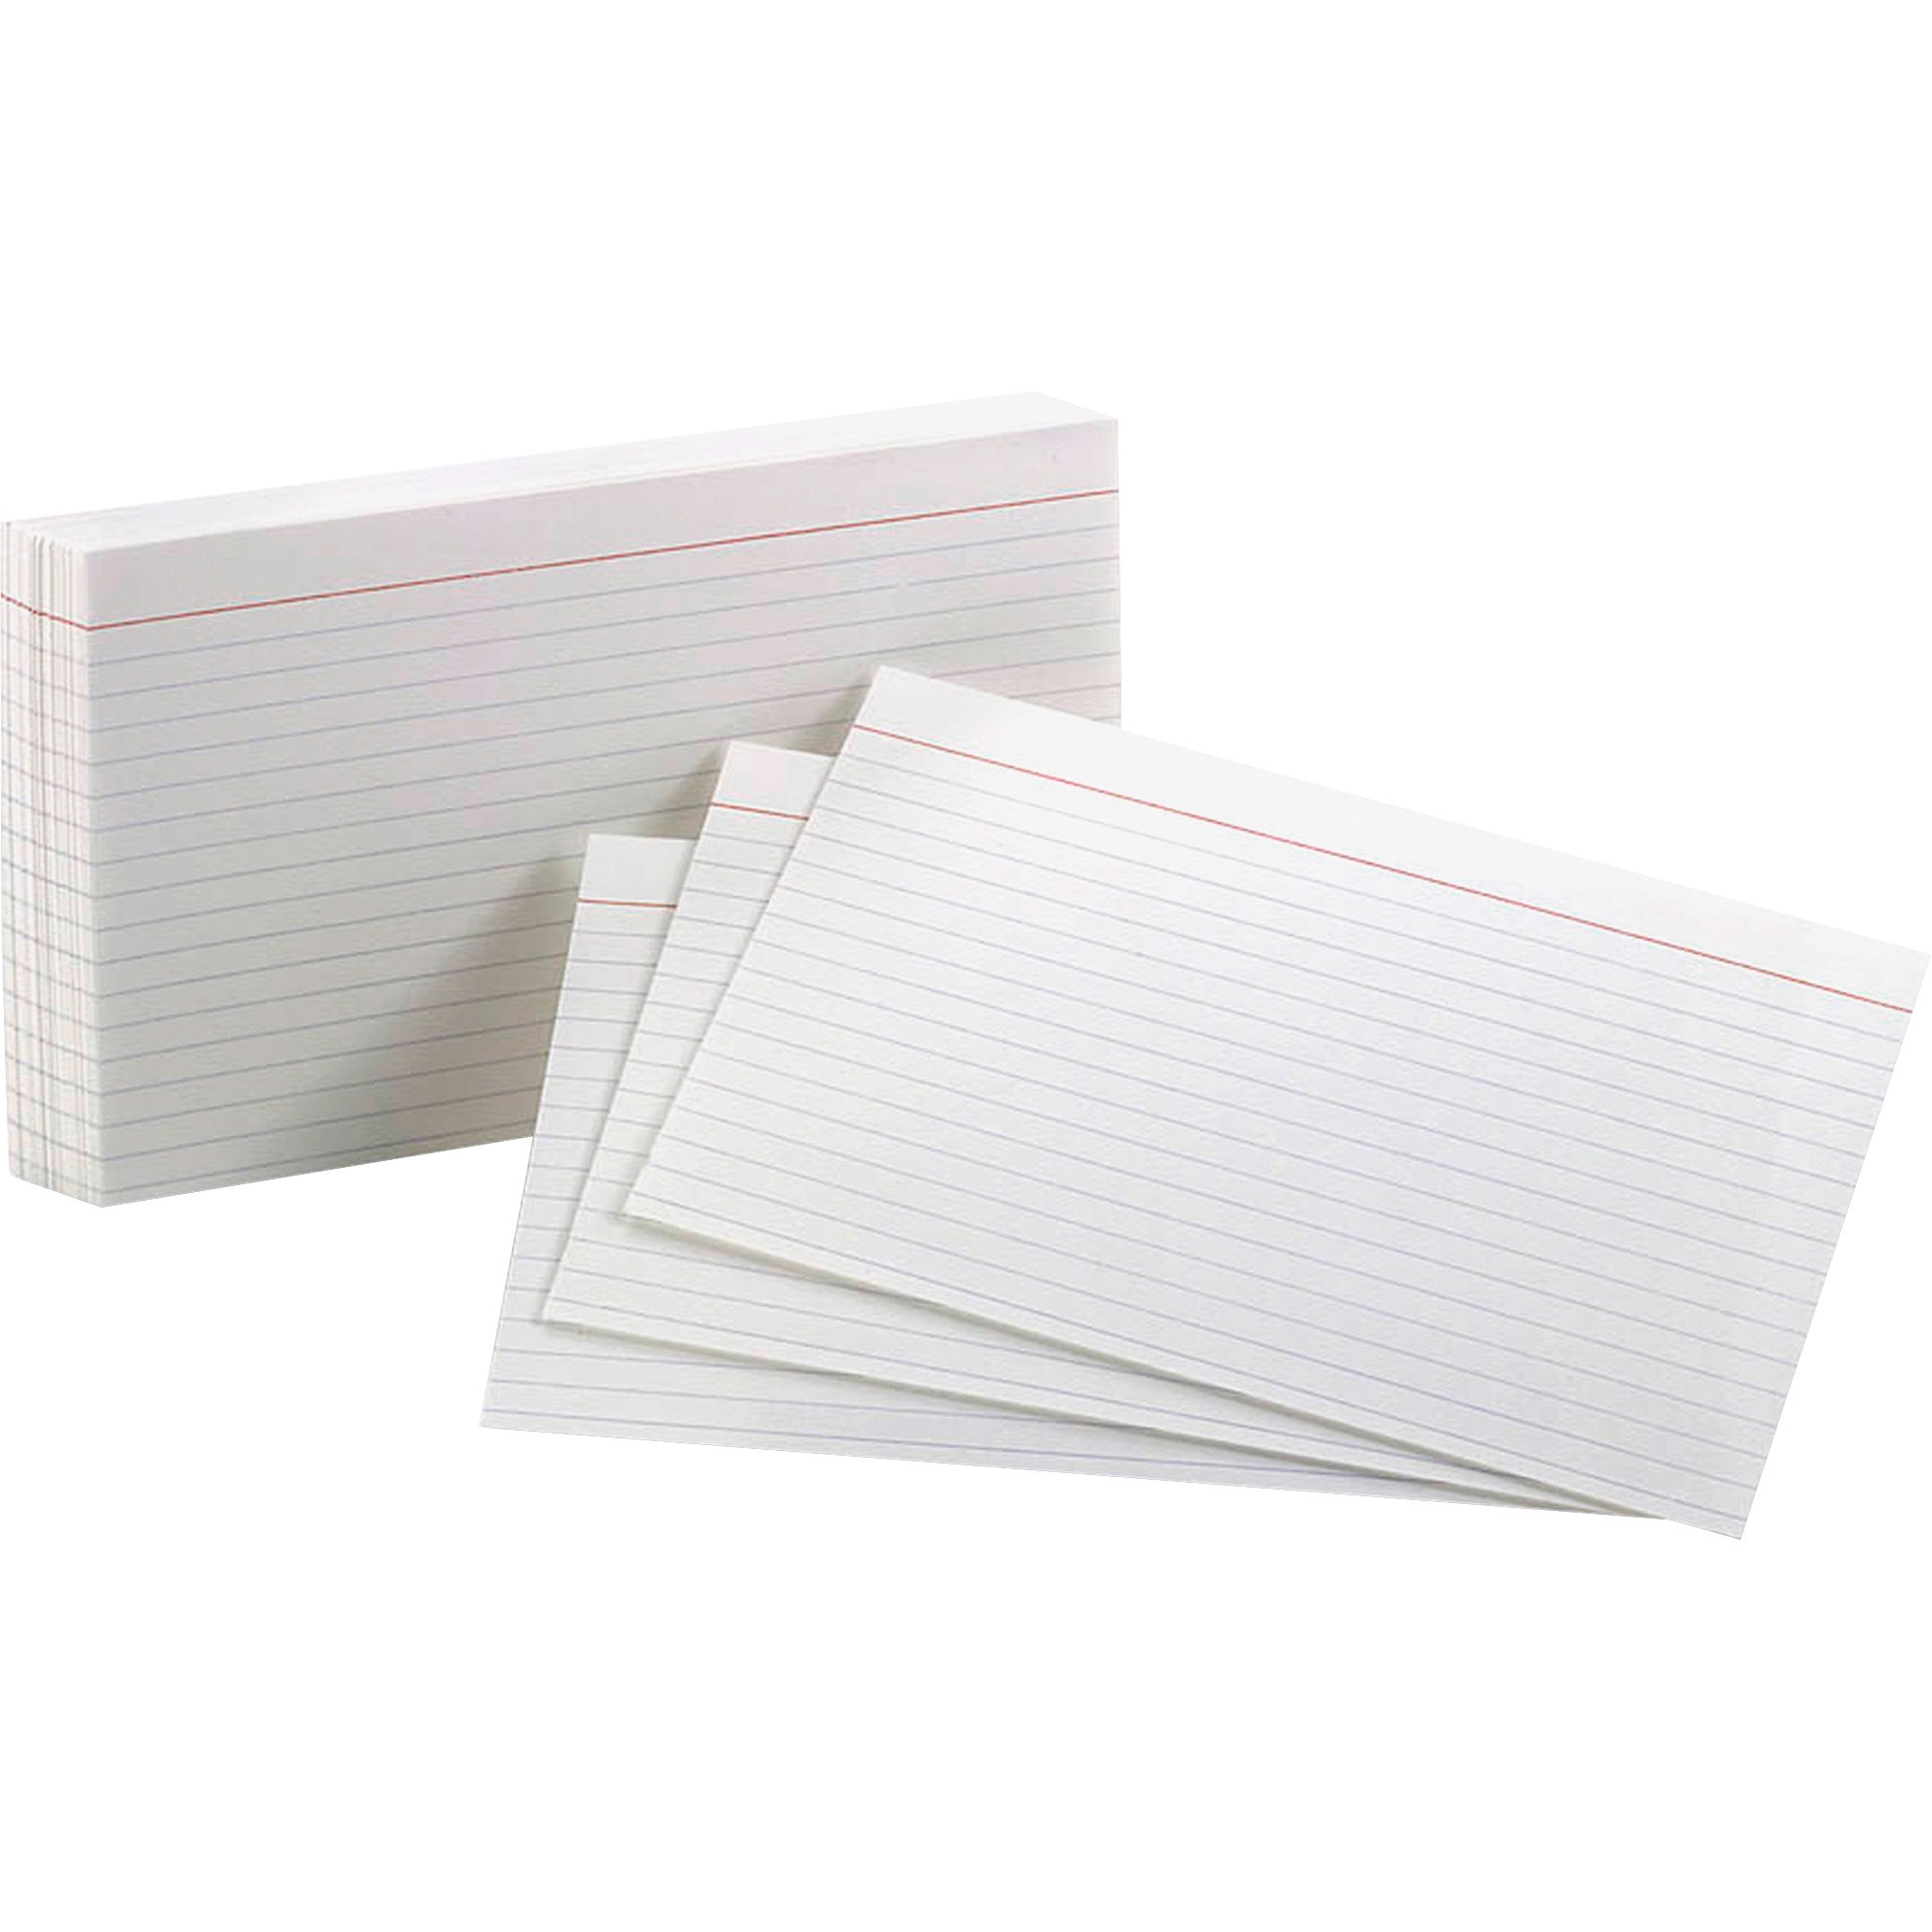 RS 4X6 RULED INDEX CARDS